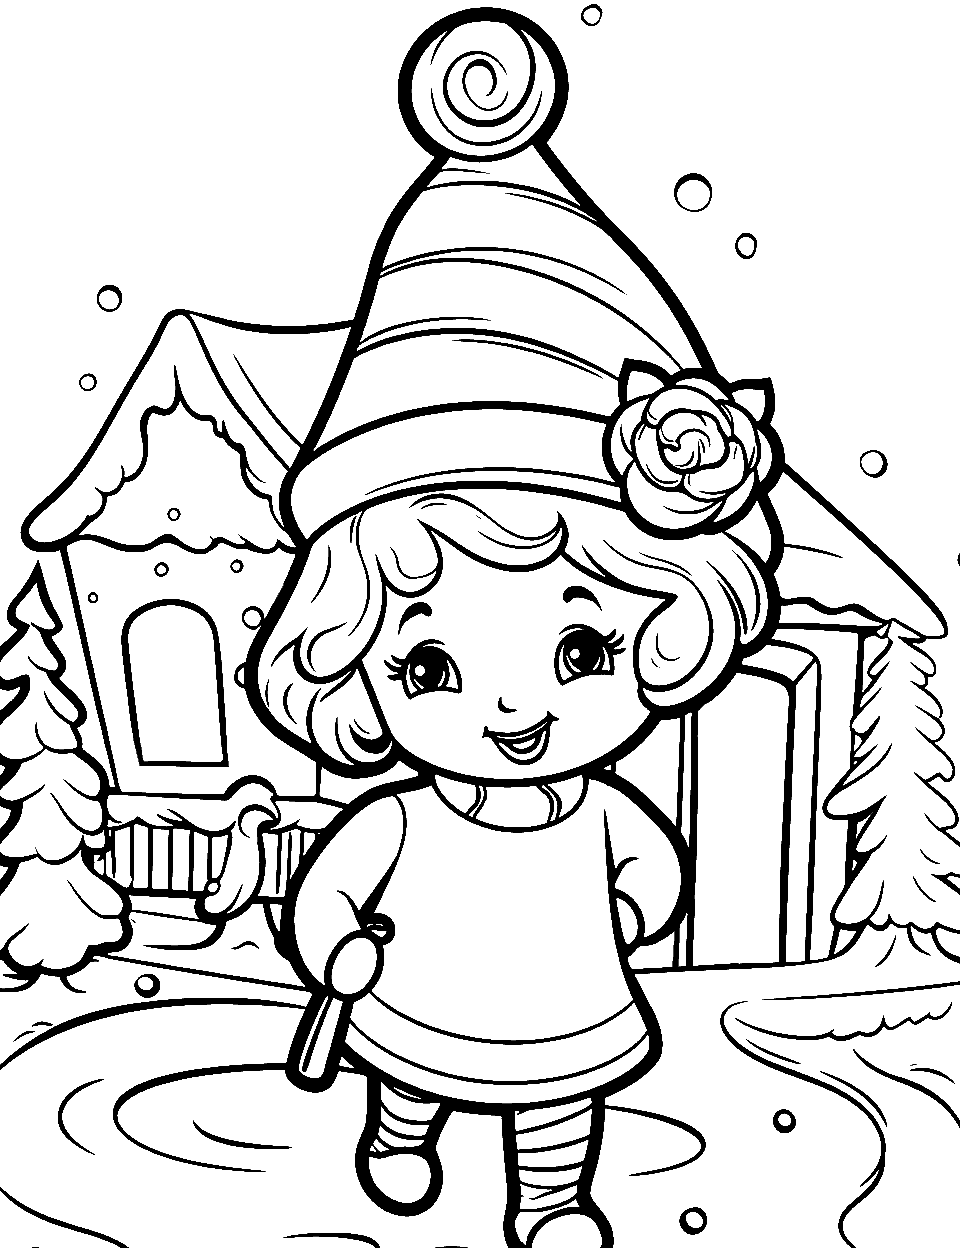 Shopkin Winter Scene Coloring Page - A winter scene with Shopkin outside its house wearing winter clothing.